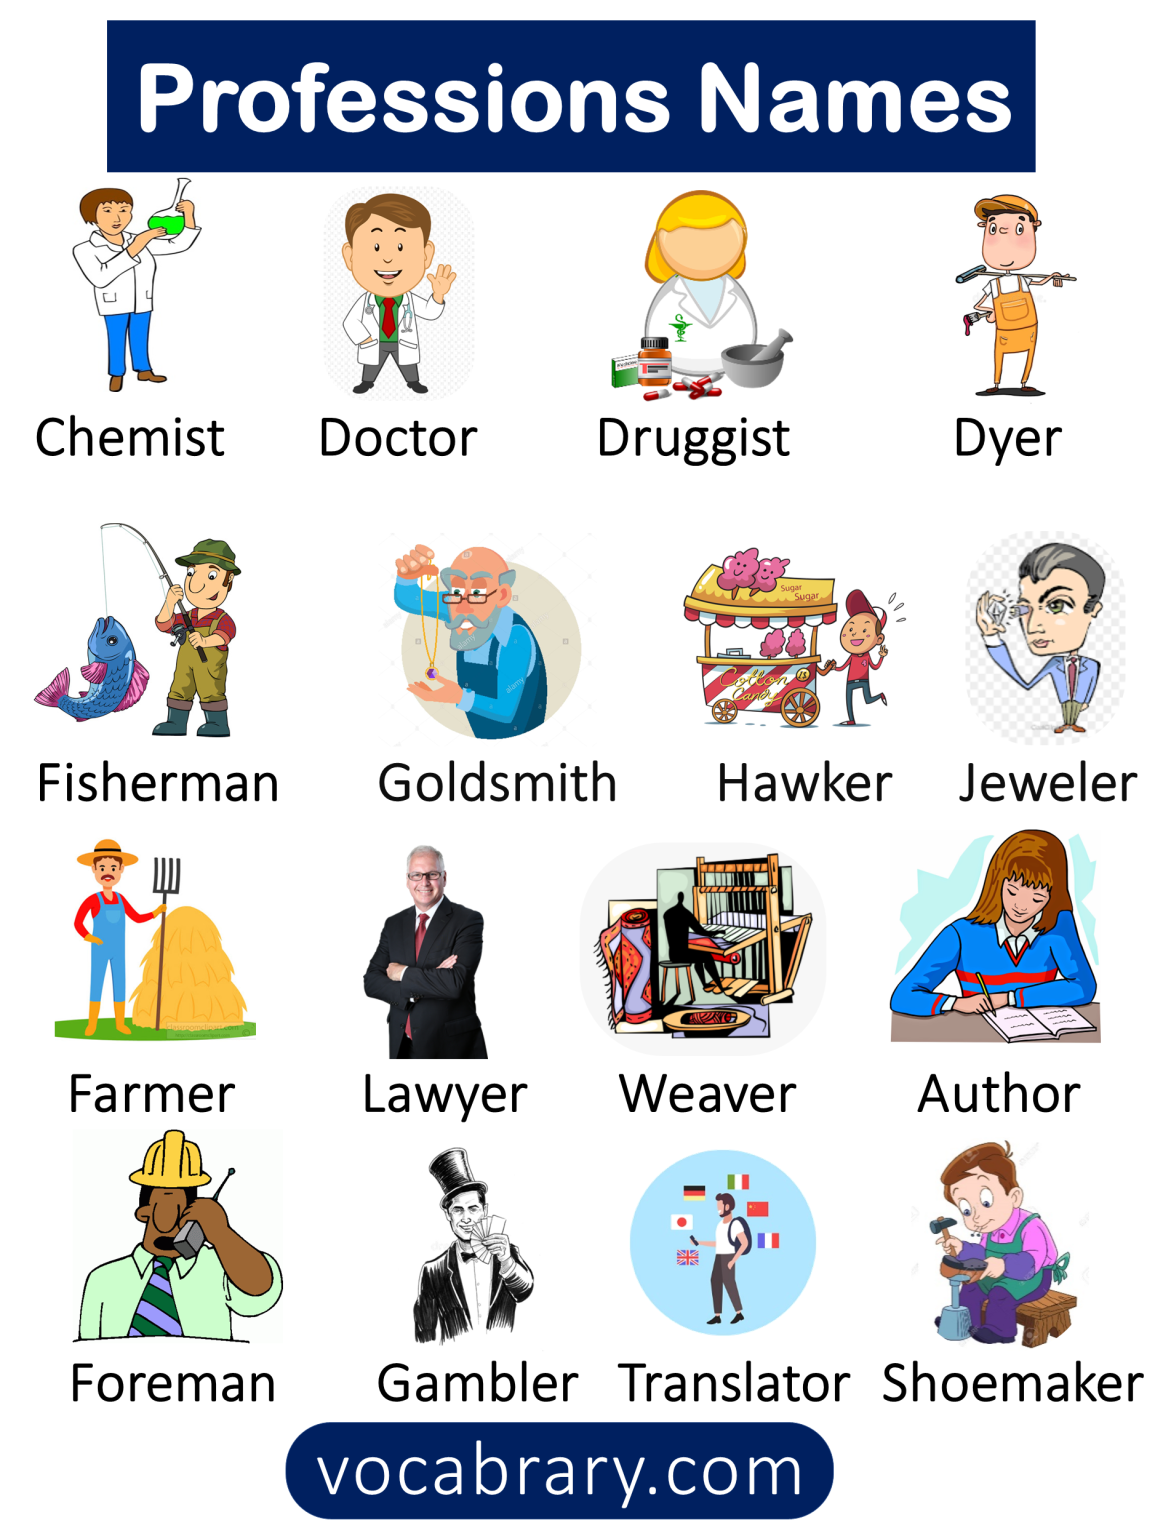 100+ Professions Names in English with Pictures Vocabrary